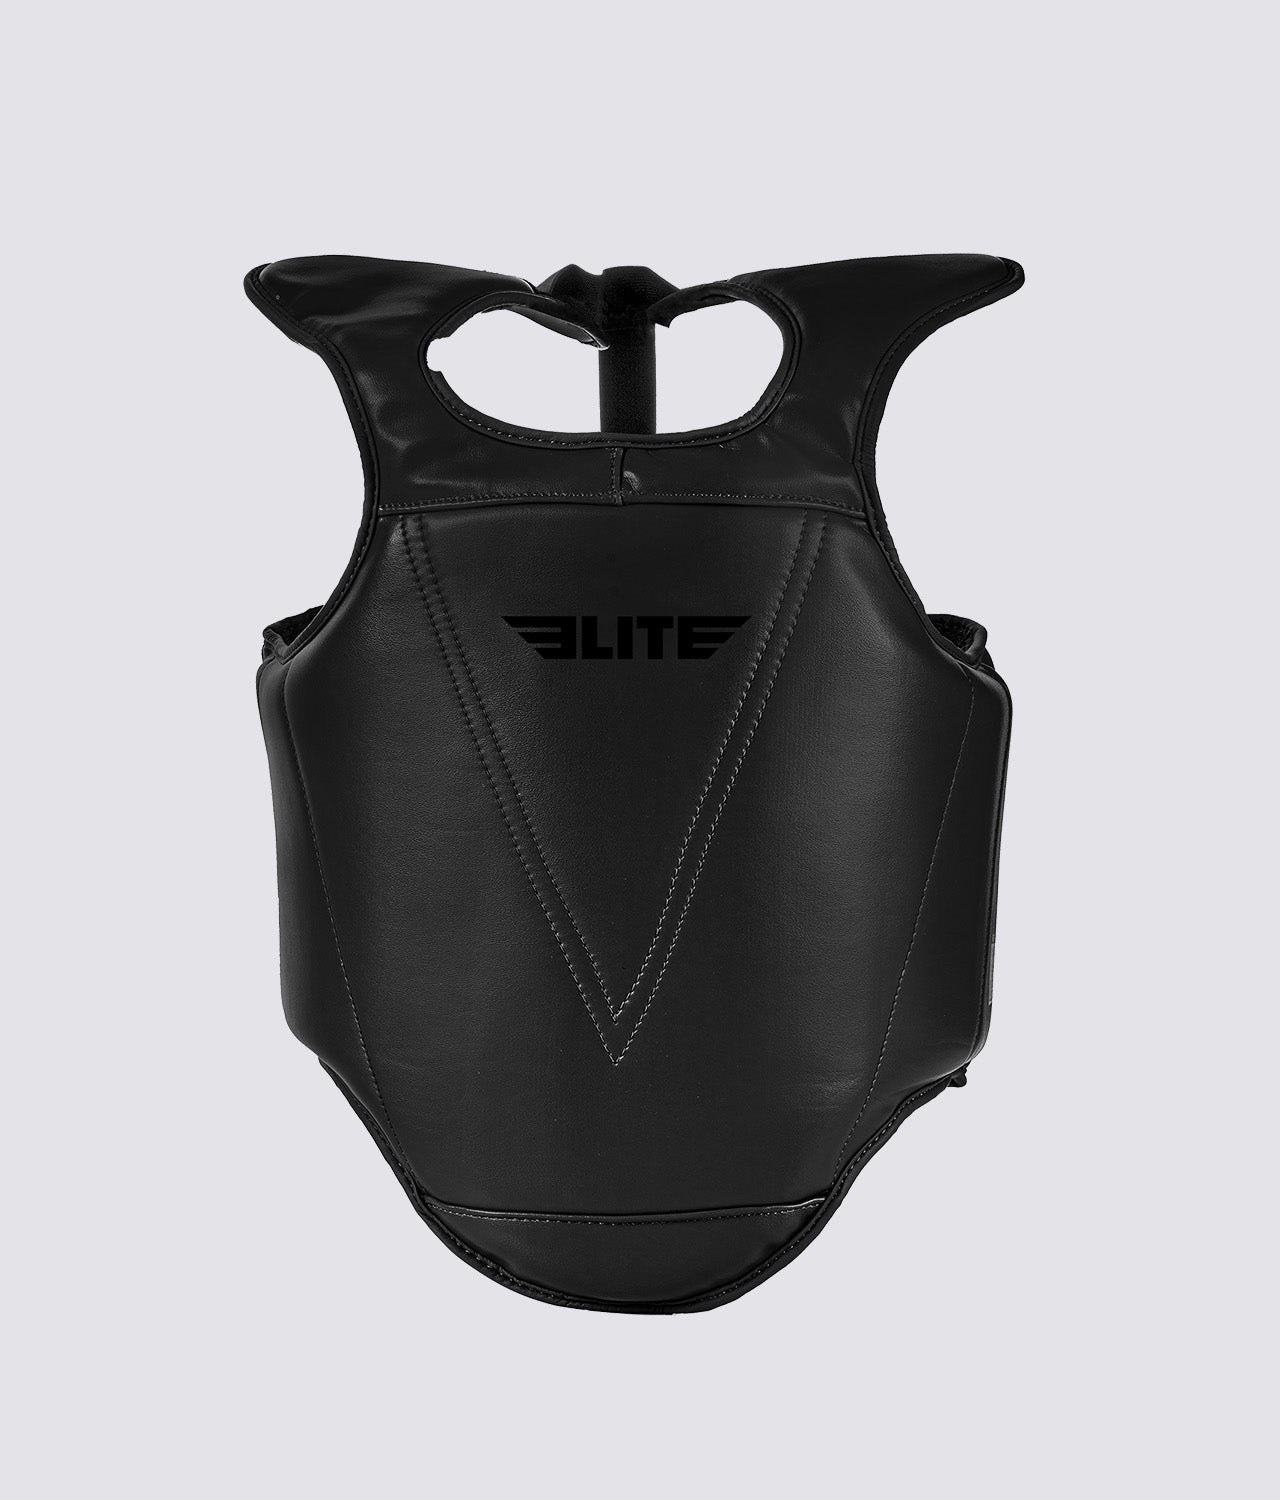 Elite Sports Kids' Black Boxing Chest Guard : 4 to 8 Years